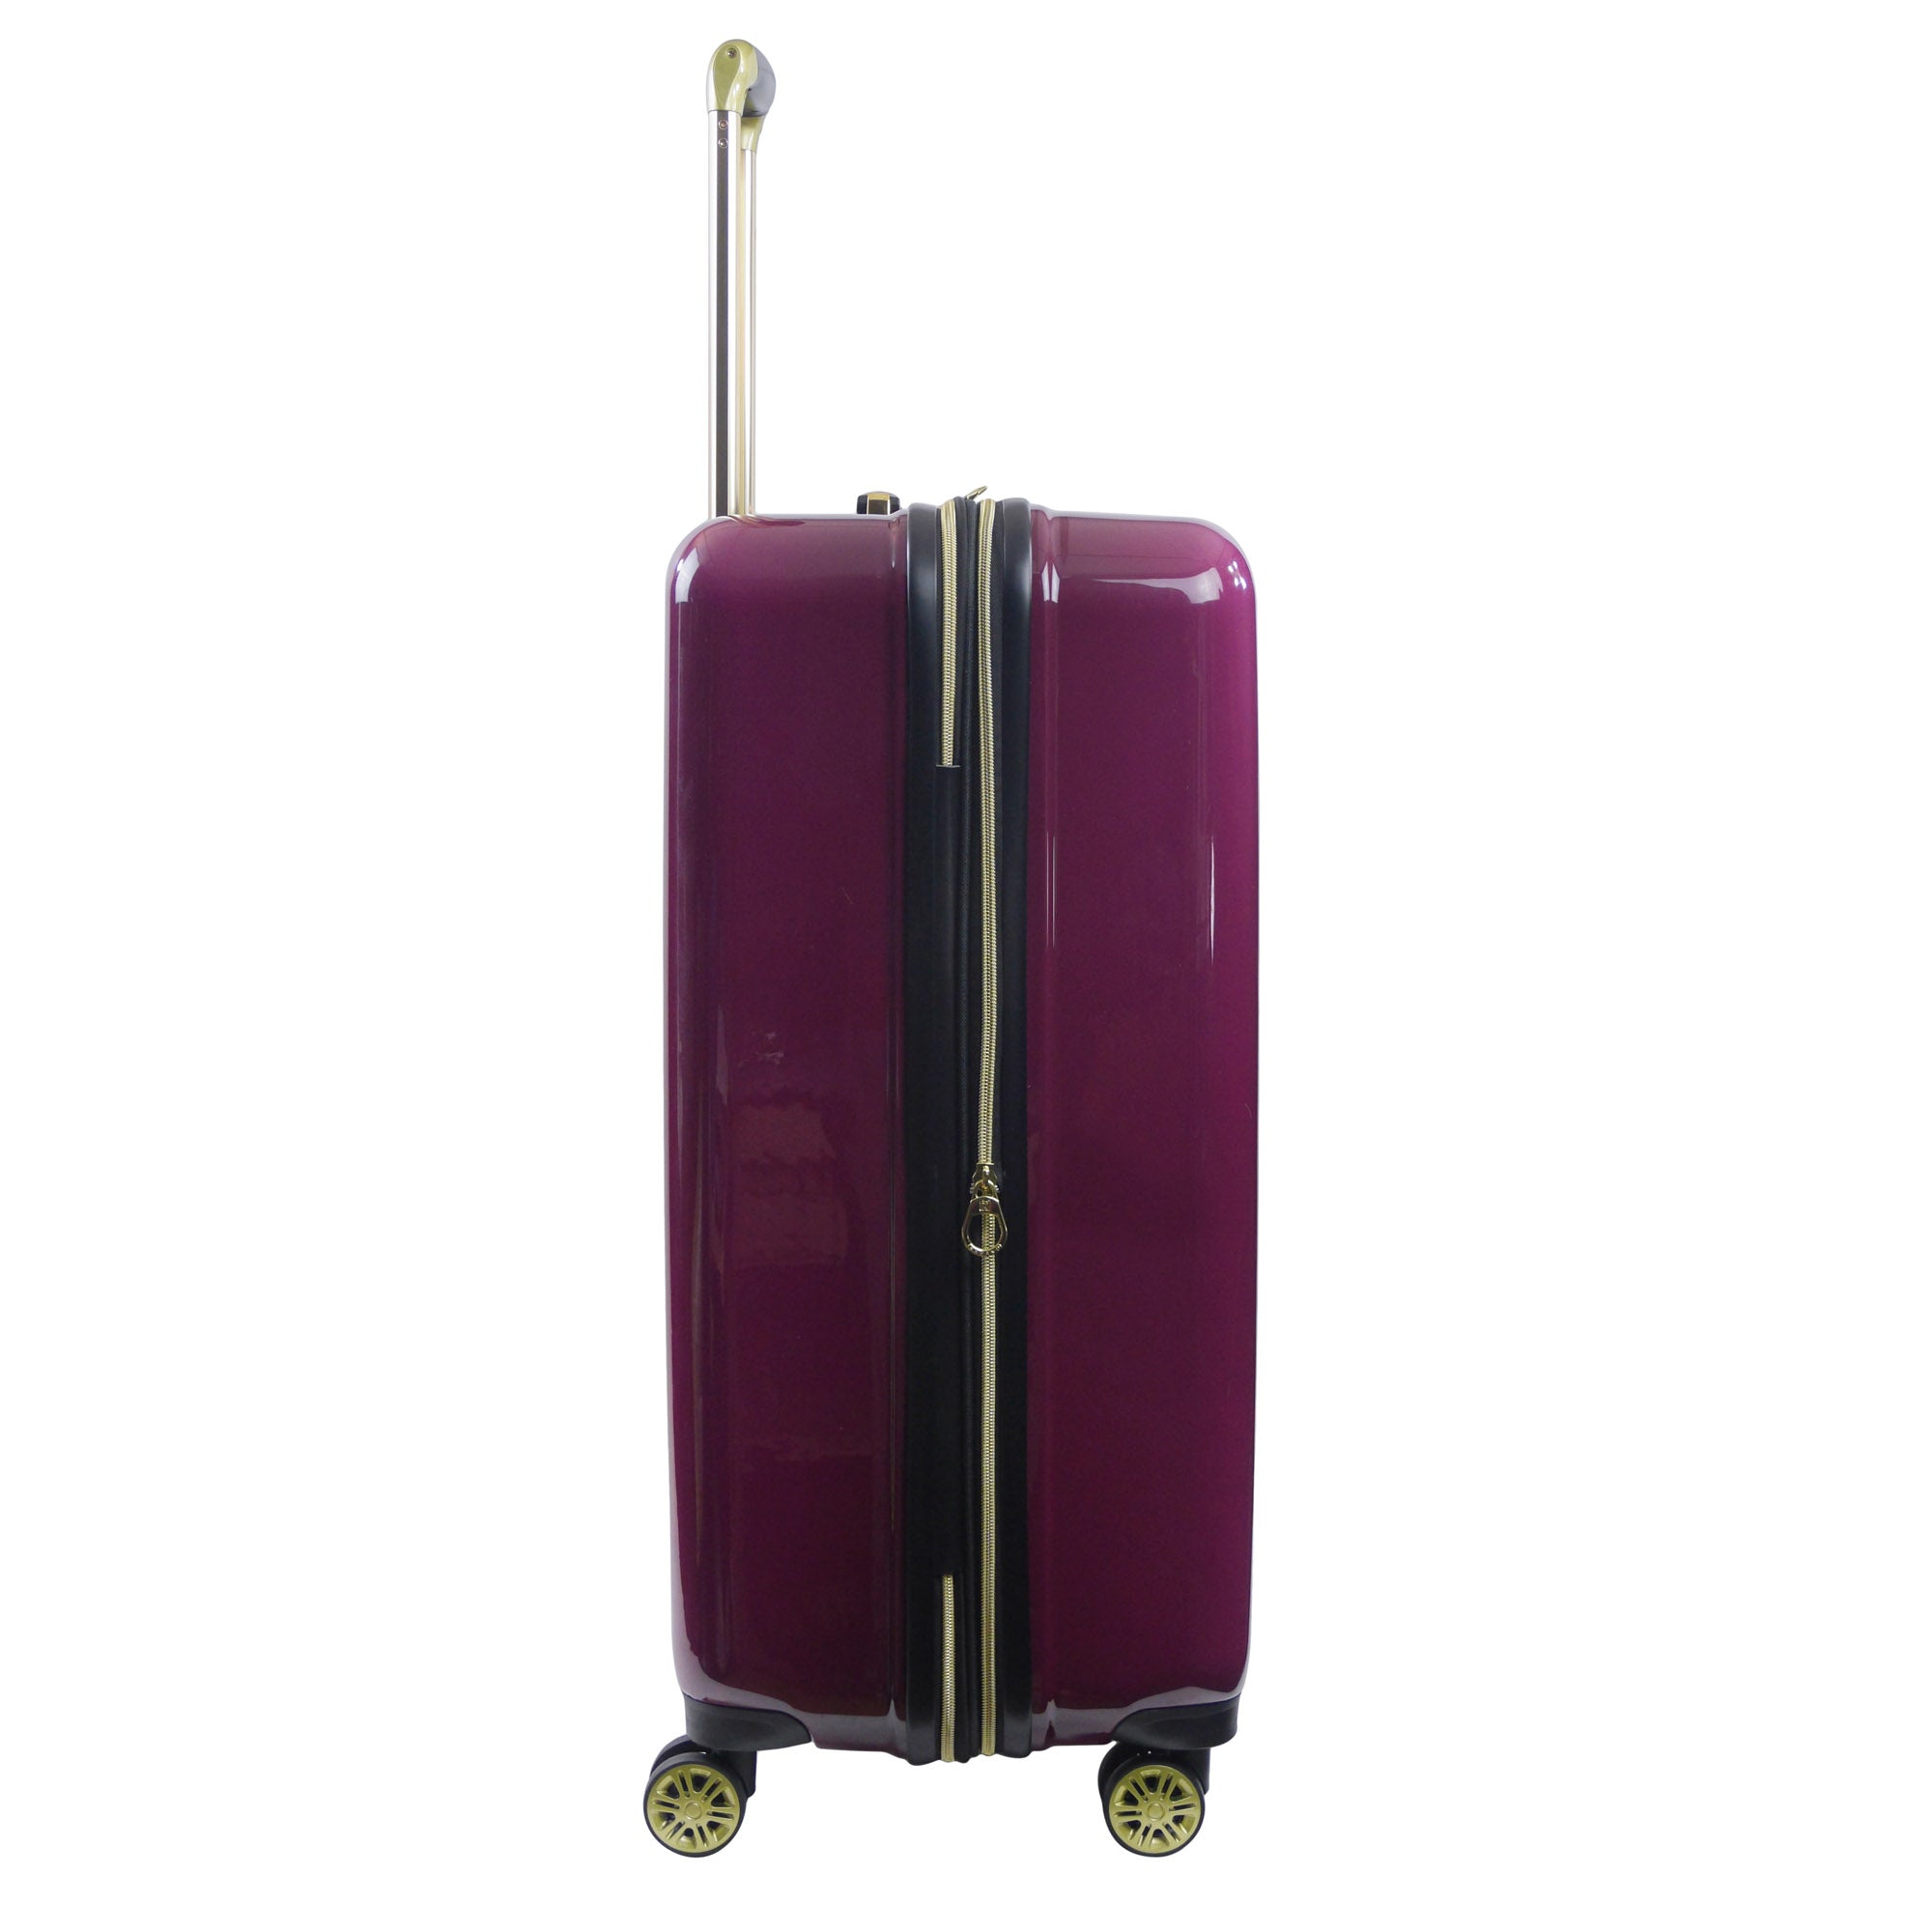 Harry Potter Hogwarts Express 29" spinner suitcase Luggage Burgundy a pull handle and 2 inches of expandable space